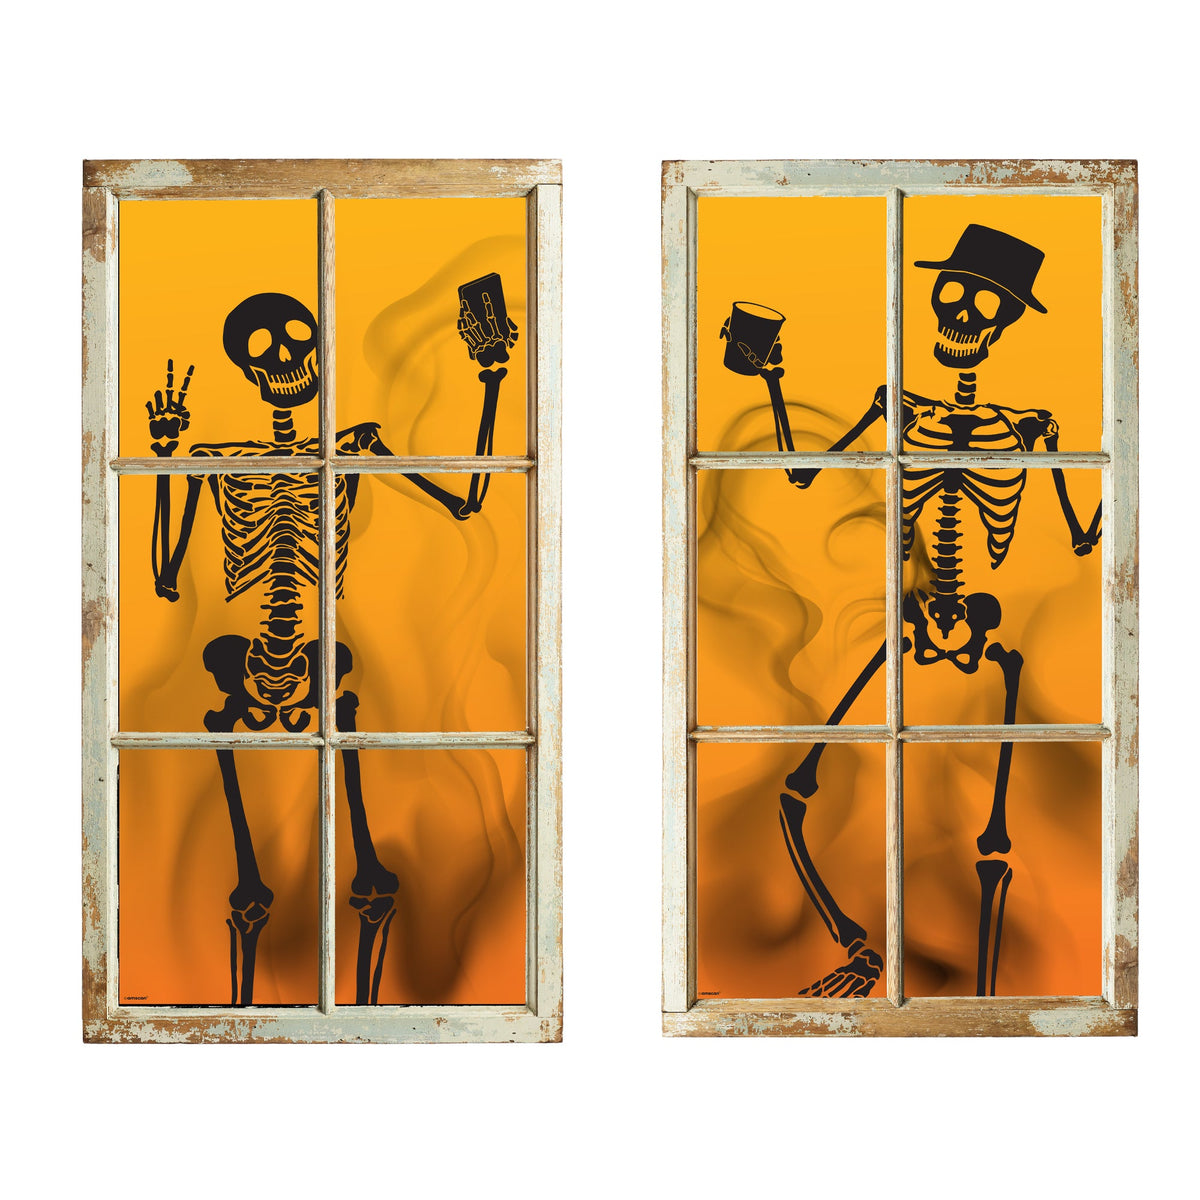 Skeletons Partying 2pack Window Silhouettes 65" x 33 1/2"